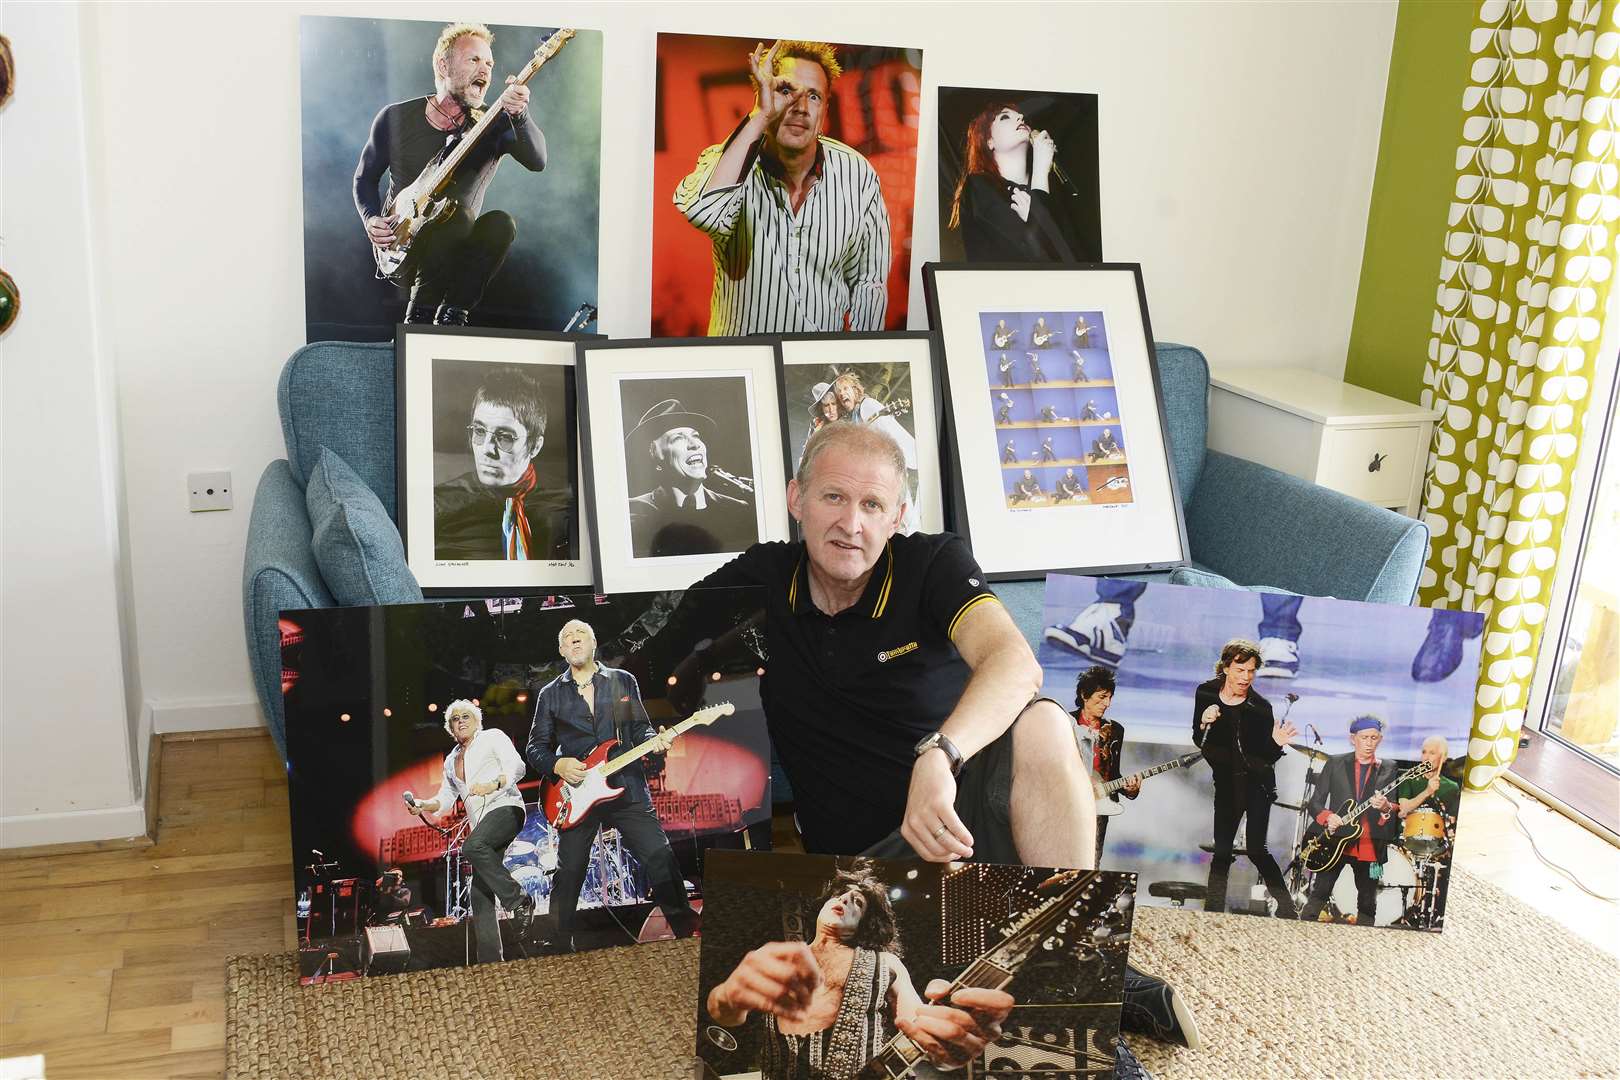 Herne Bay music photographer Matt Kent with some of the images he will be exhibiting. Picture: Paul Amos